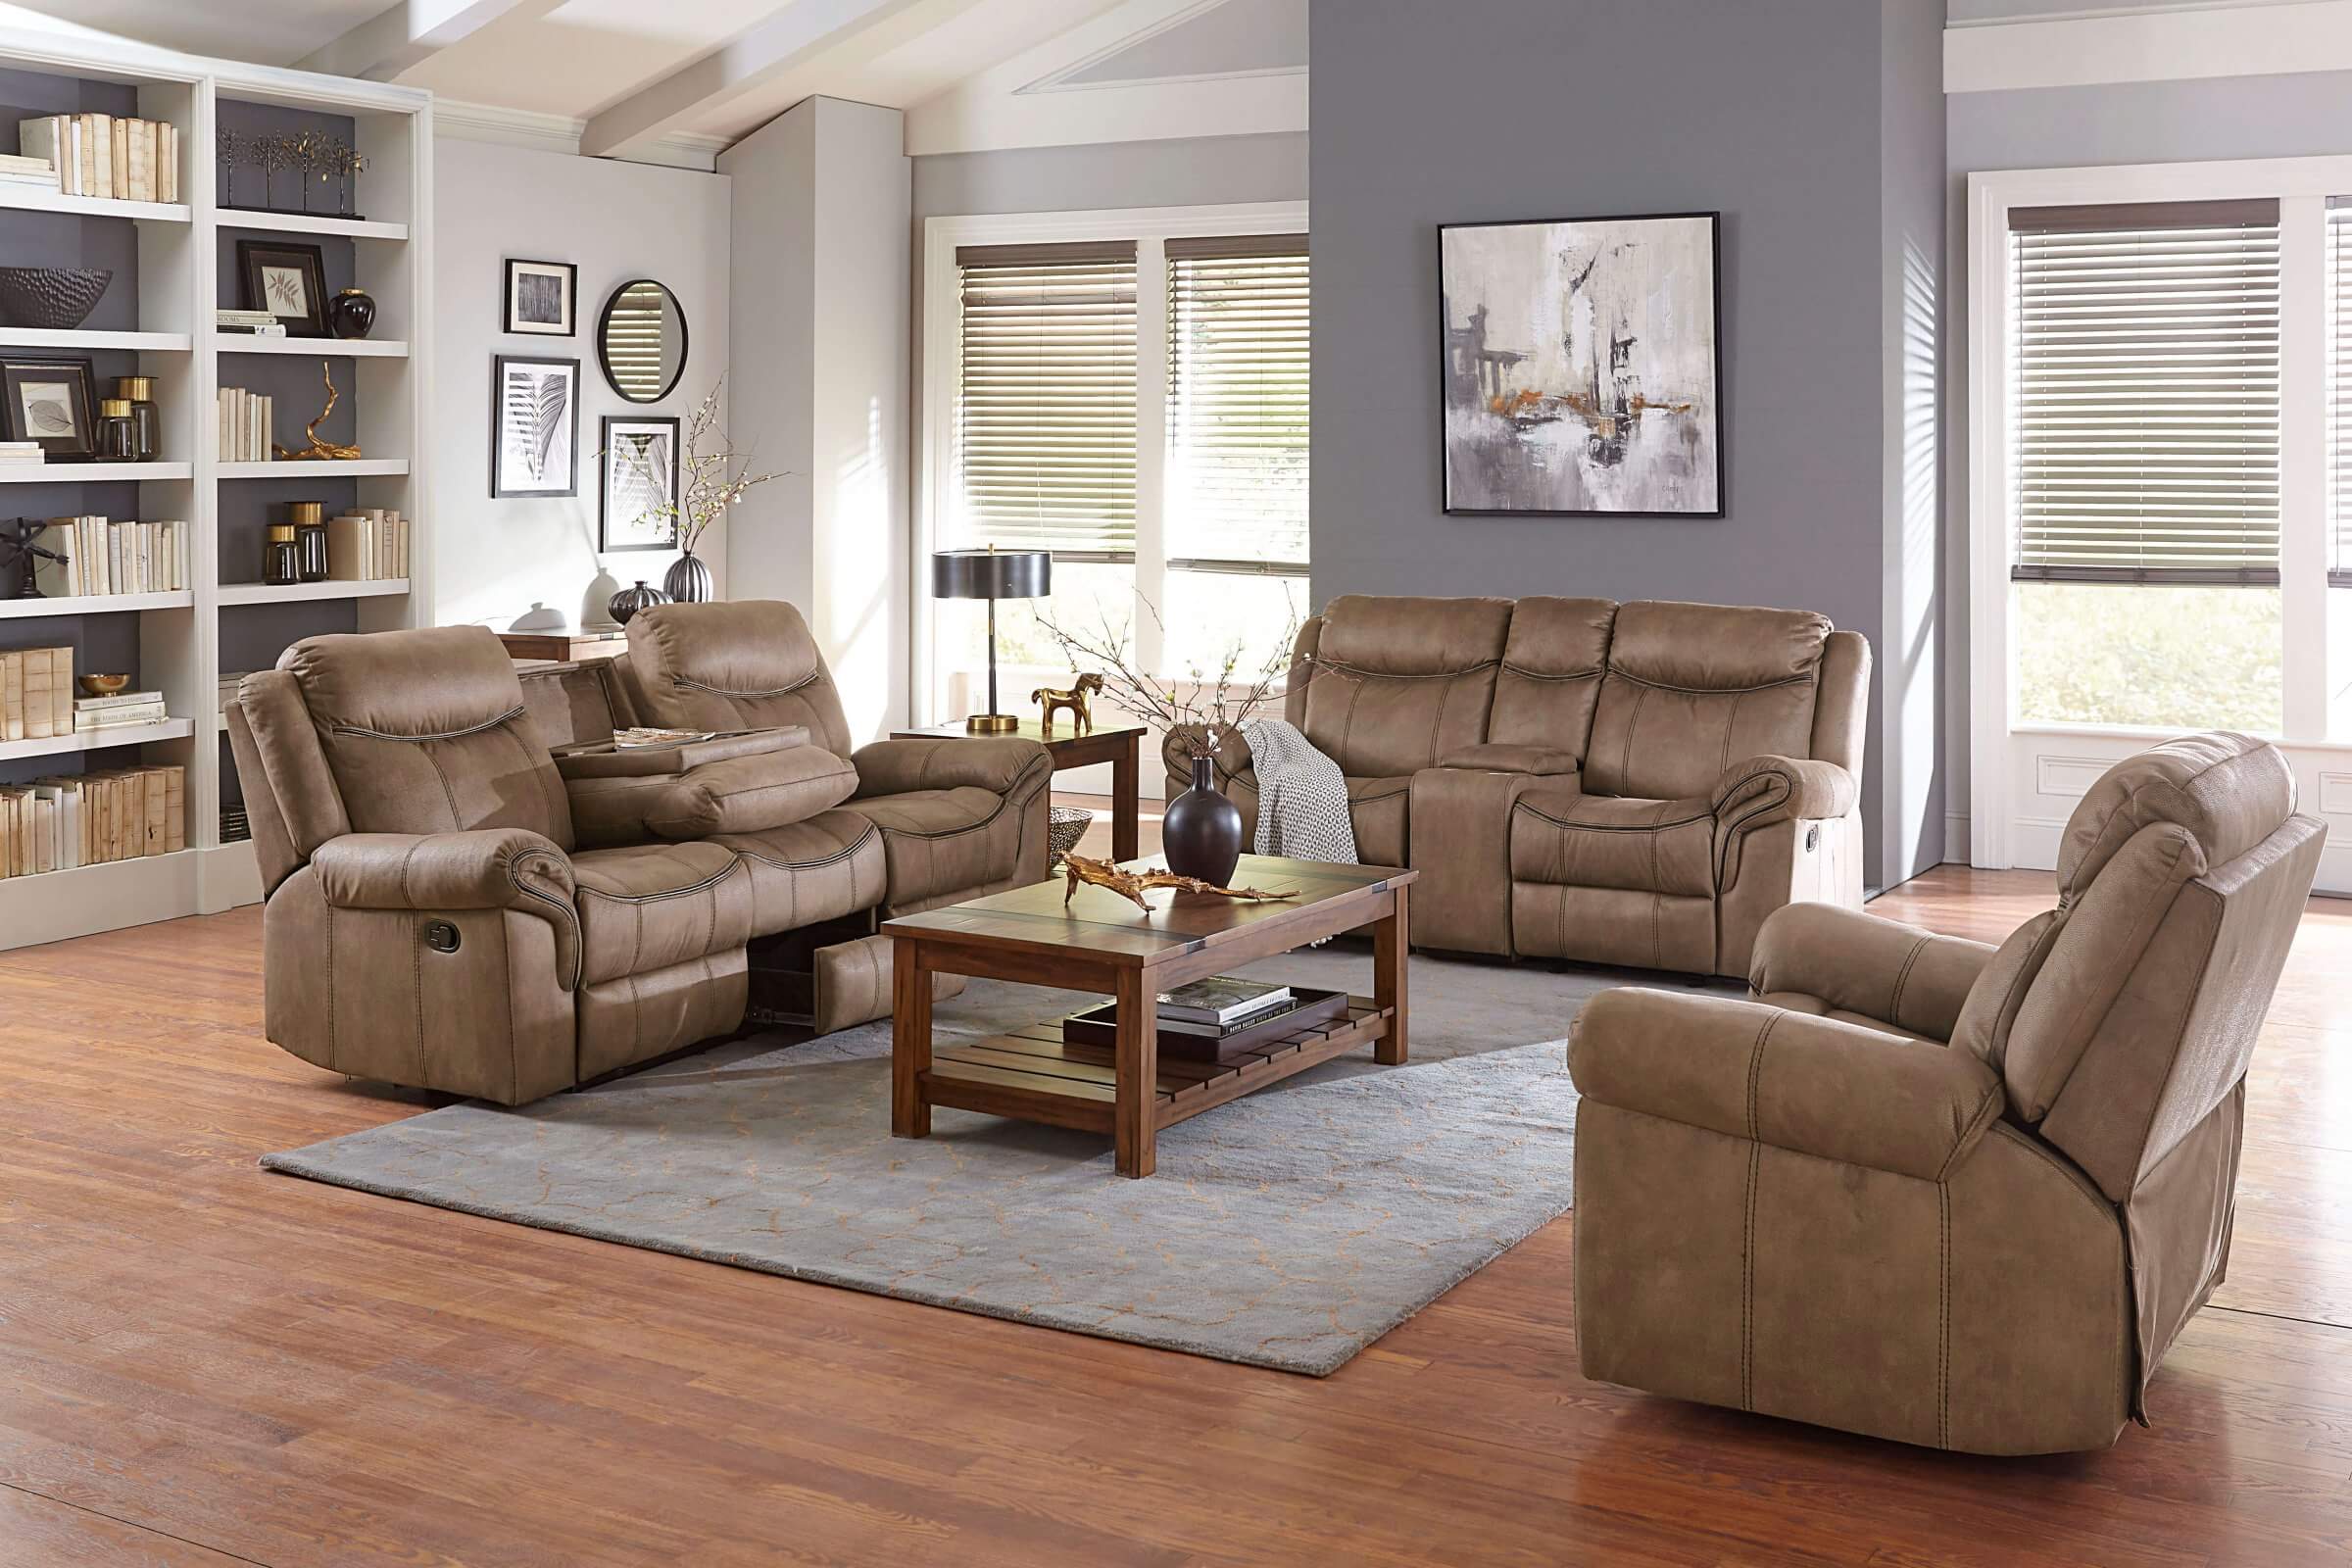 How do you place a couch and recliner in a living room?